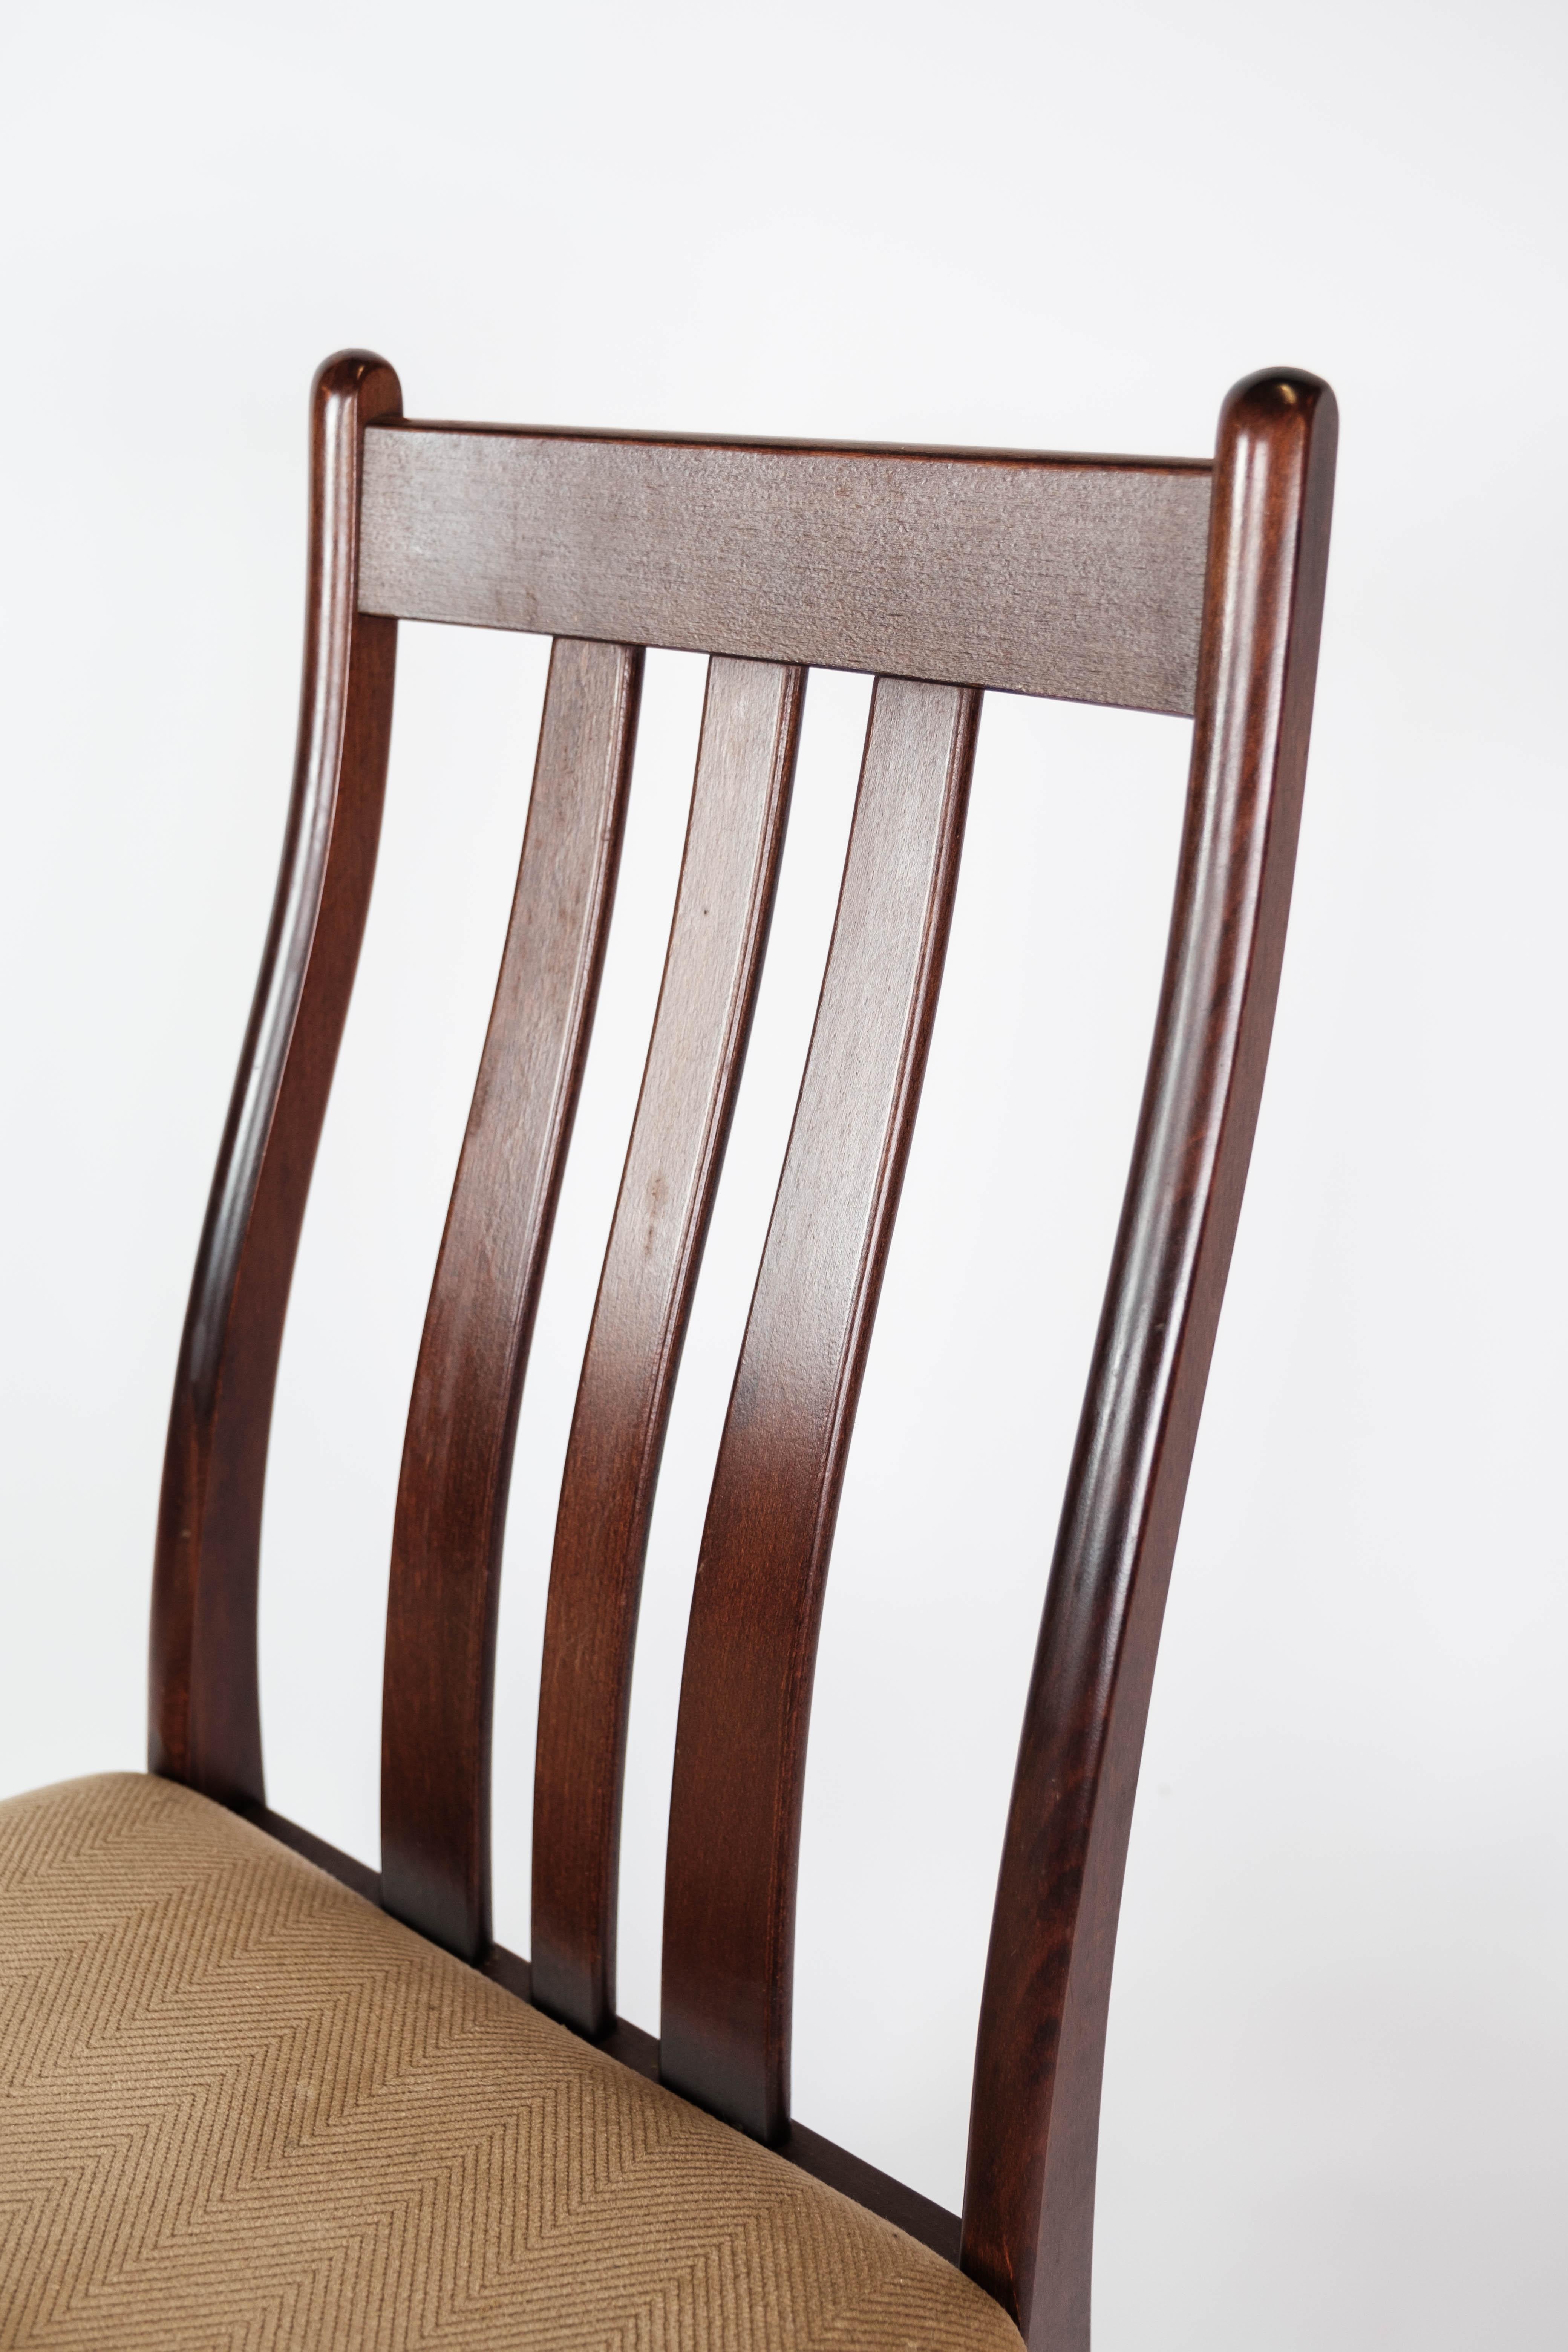 Set of Four Dining Room Chairs Made In Mahogany By Farstrup From 1960s For Sale 5